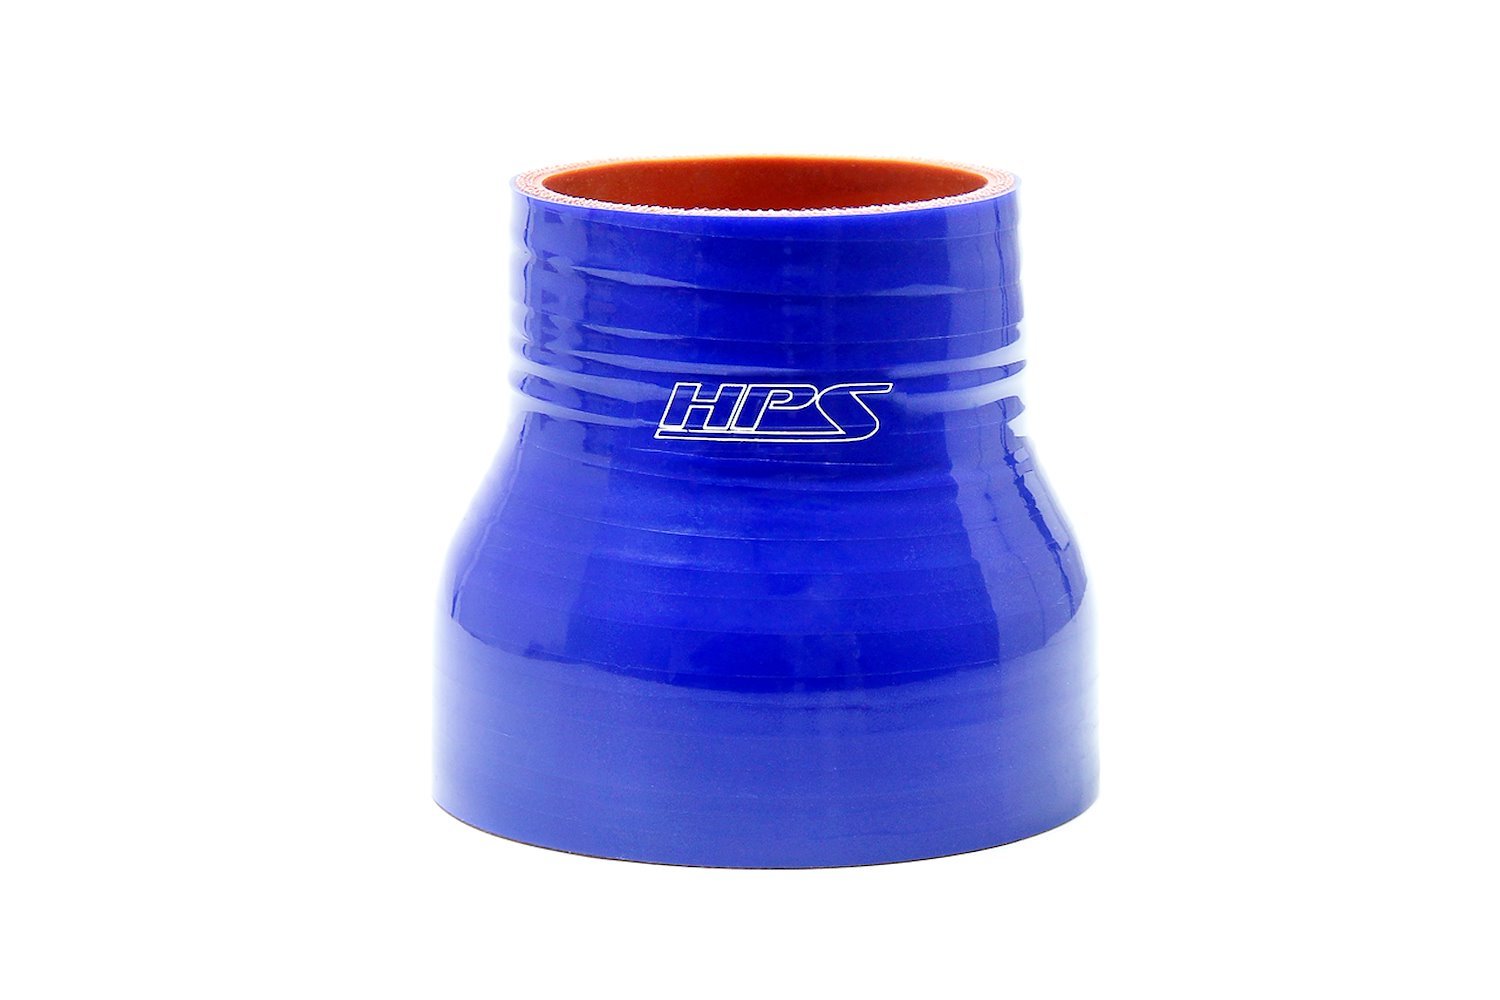 HTSR-300-325-L4-BLUE Silicone Reducer Hose, High-Temp 4-Ply Reinforced, 3 in. - 3-1/4 in. ID, 4 in. Long, Blue